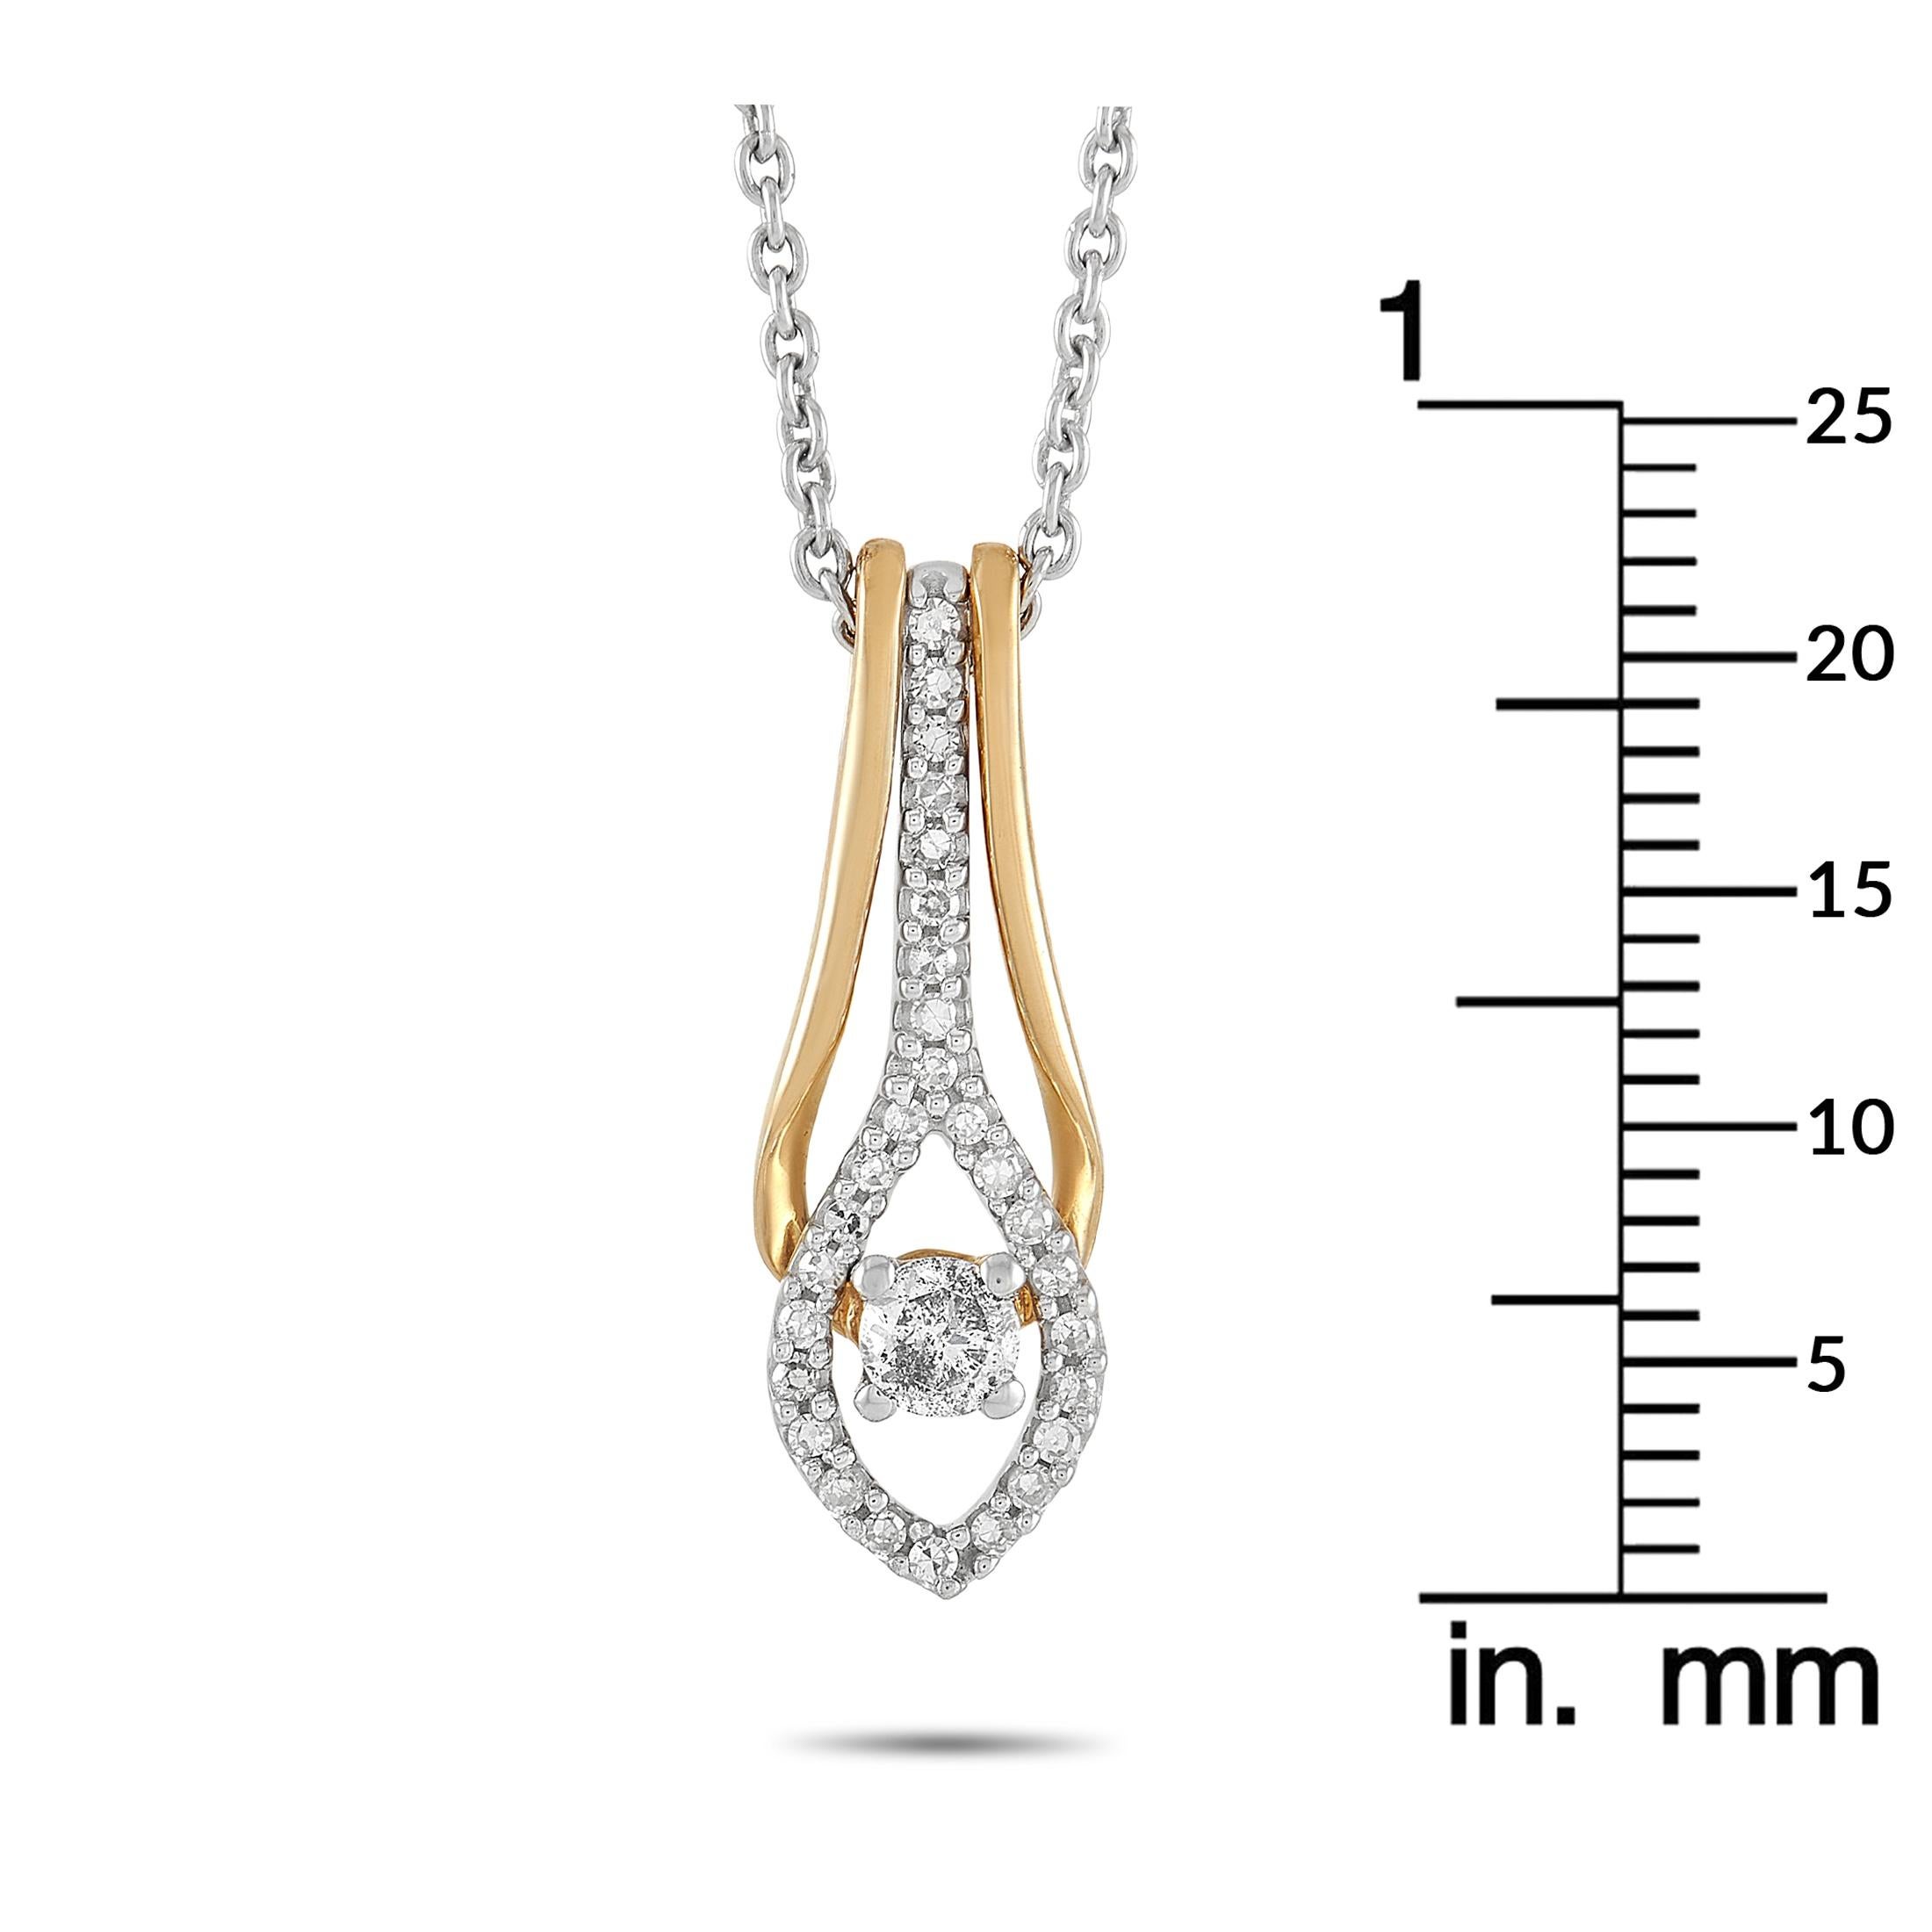 LB Exclusive 10k White and Yellow Gold 0.25 Ct Diamond Pendant Necklace In New Condition For Sale In Southampton, PA